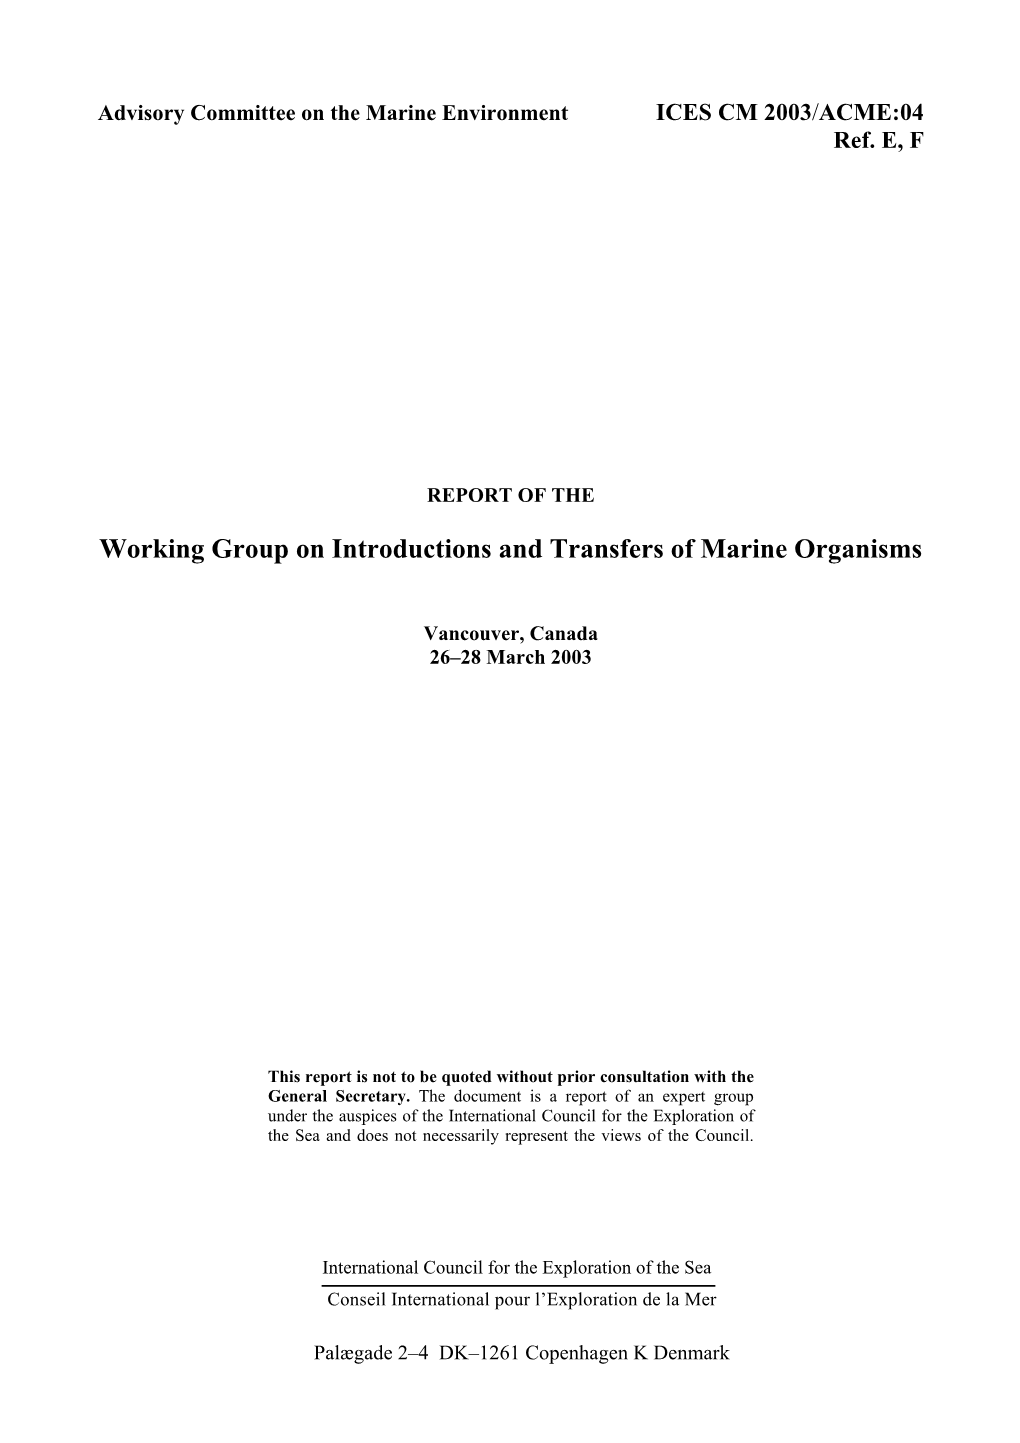 Working Group on Introductions and Transfers of Marine Organisms (WGITMO). ICES CM 2003/ACME:04, Ref. E, F